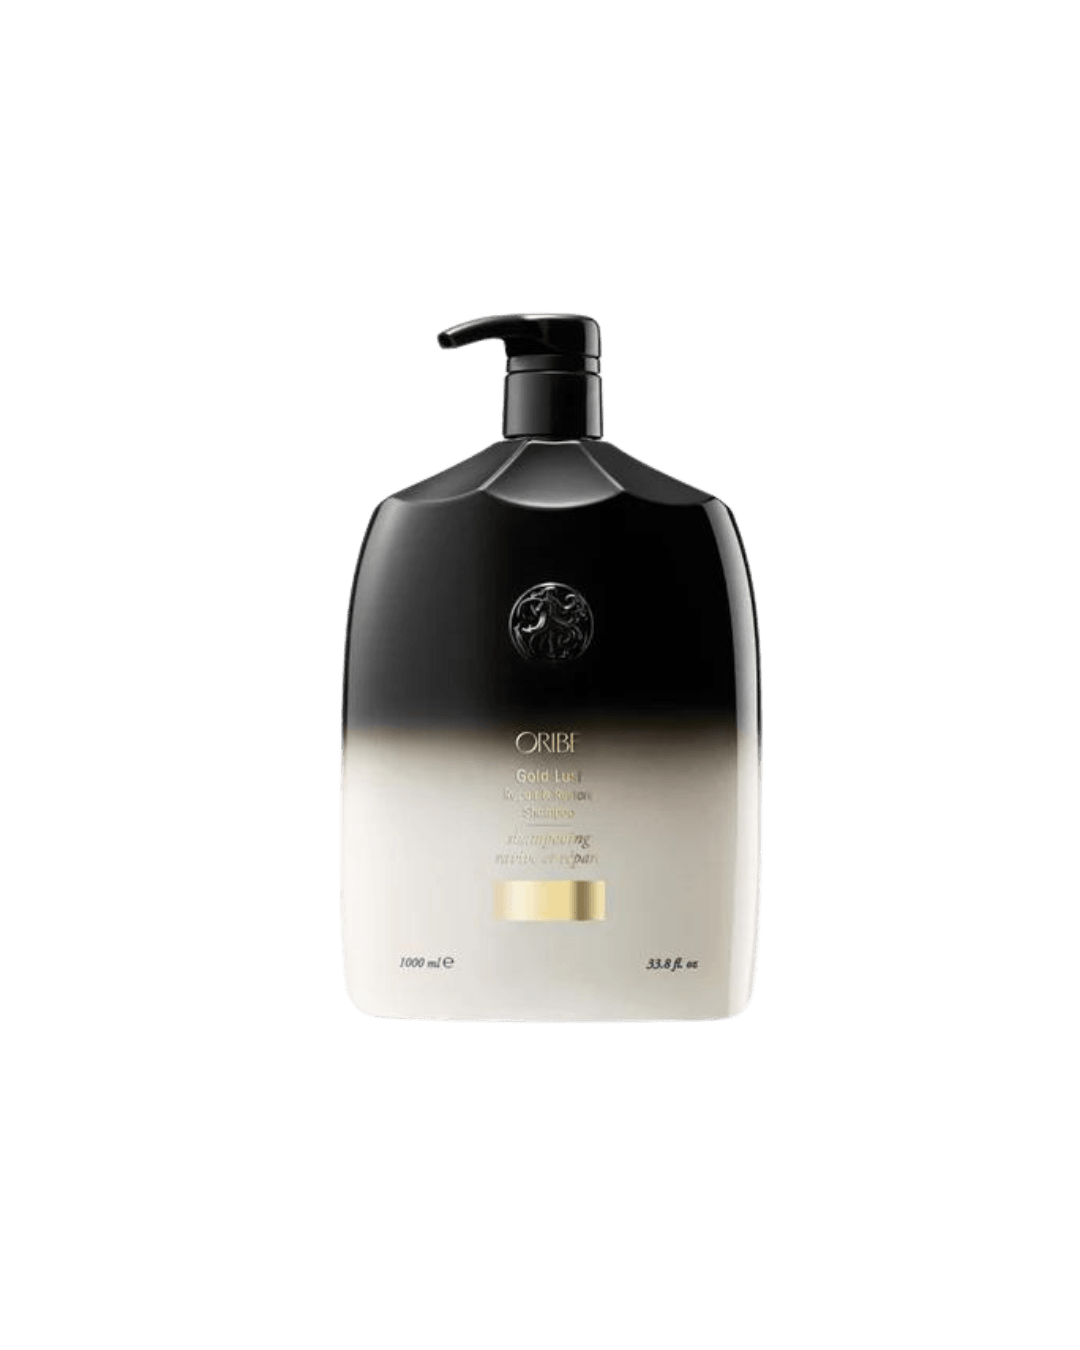 Daily Vanity Beauty Awards 2024 Best Hair care Oribe Gold Lust Repair &#038; Restore Shampoo Voted By Beauty Experts